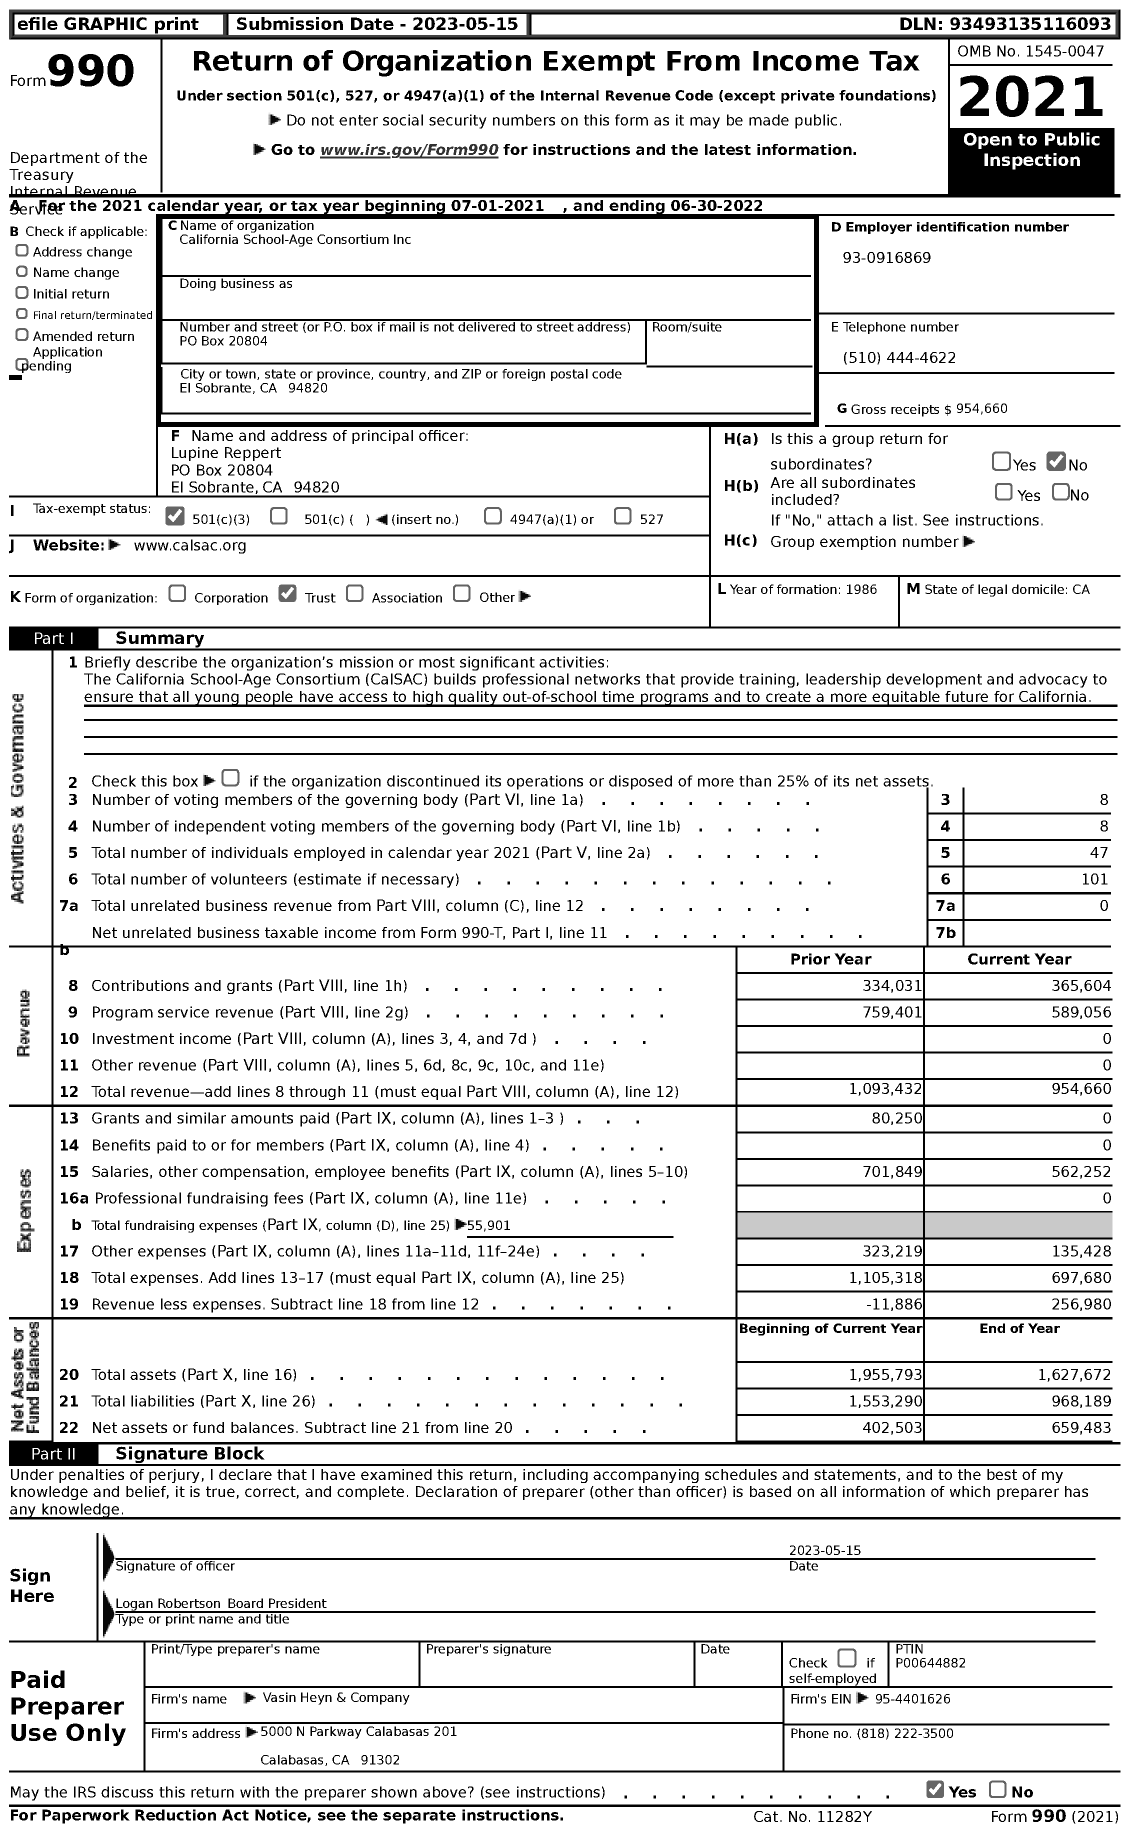 Image of first page of 2021 Form 990 for California School Age Consortium